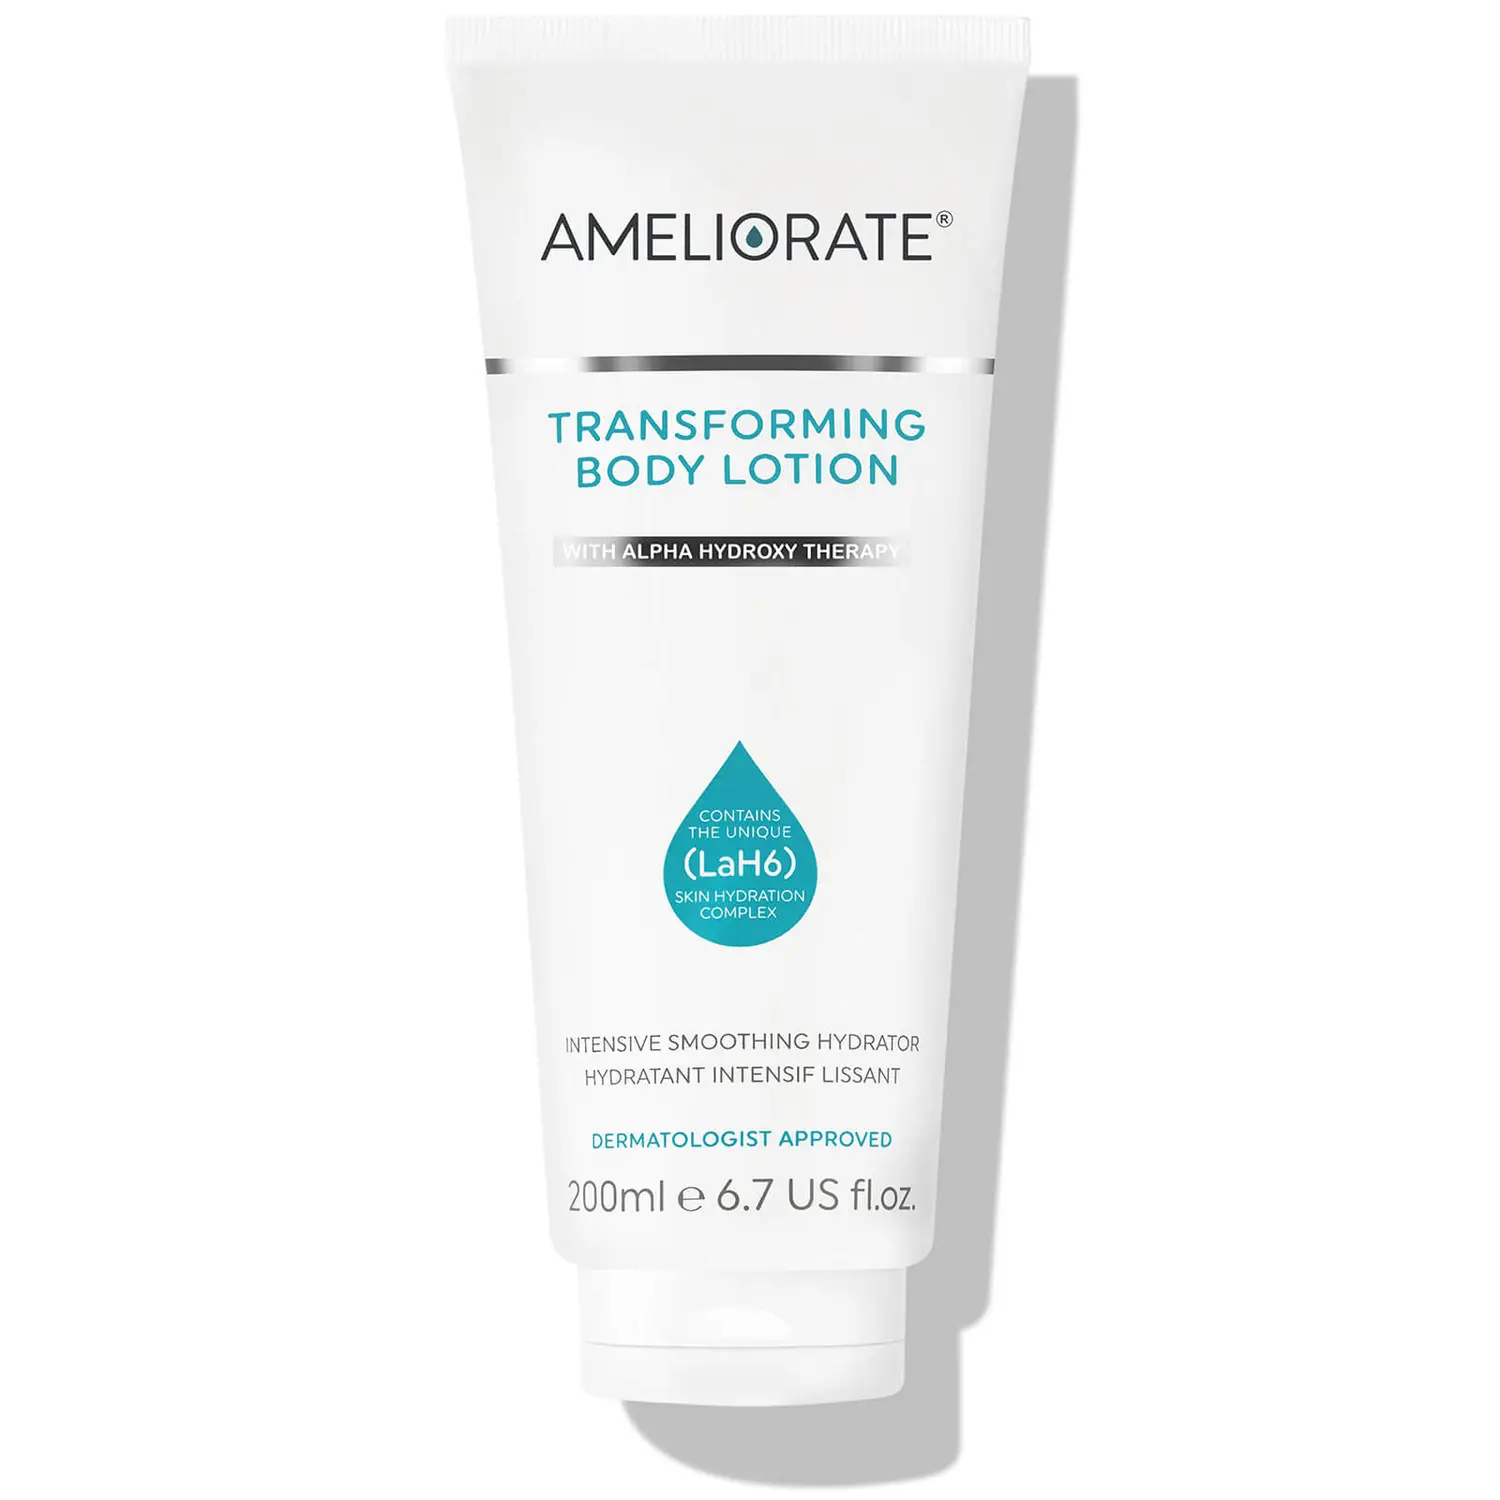 AMELIORATE Transforming Body Lotion 